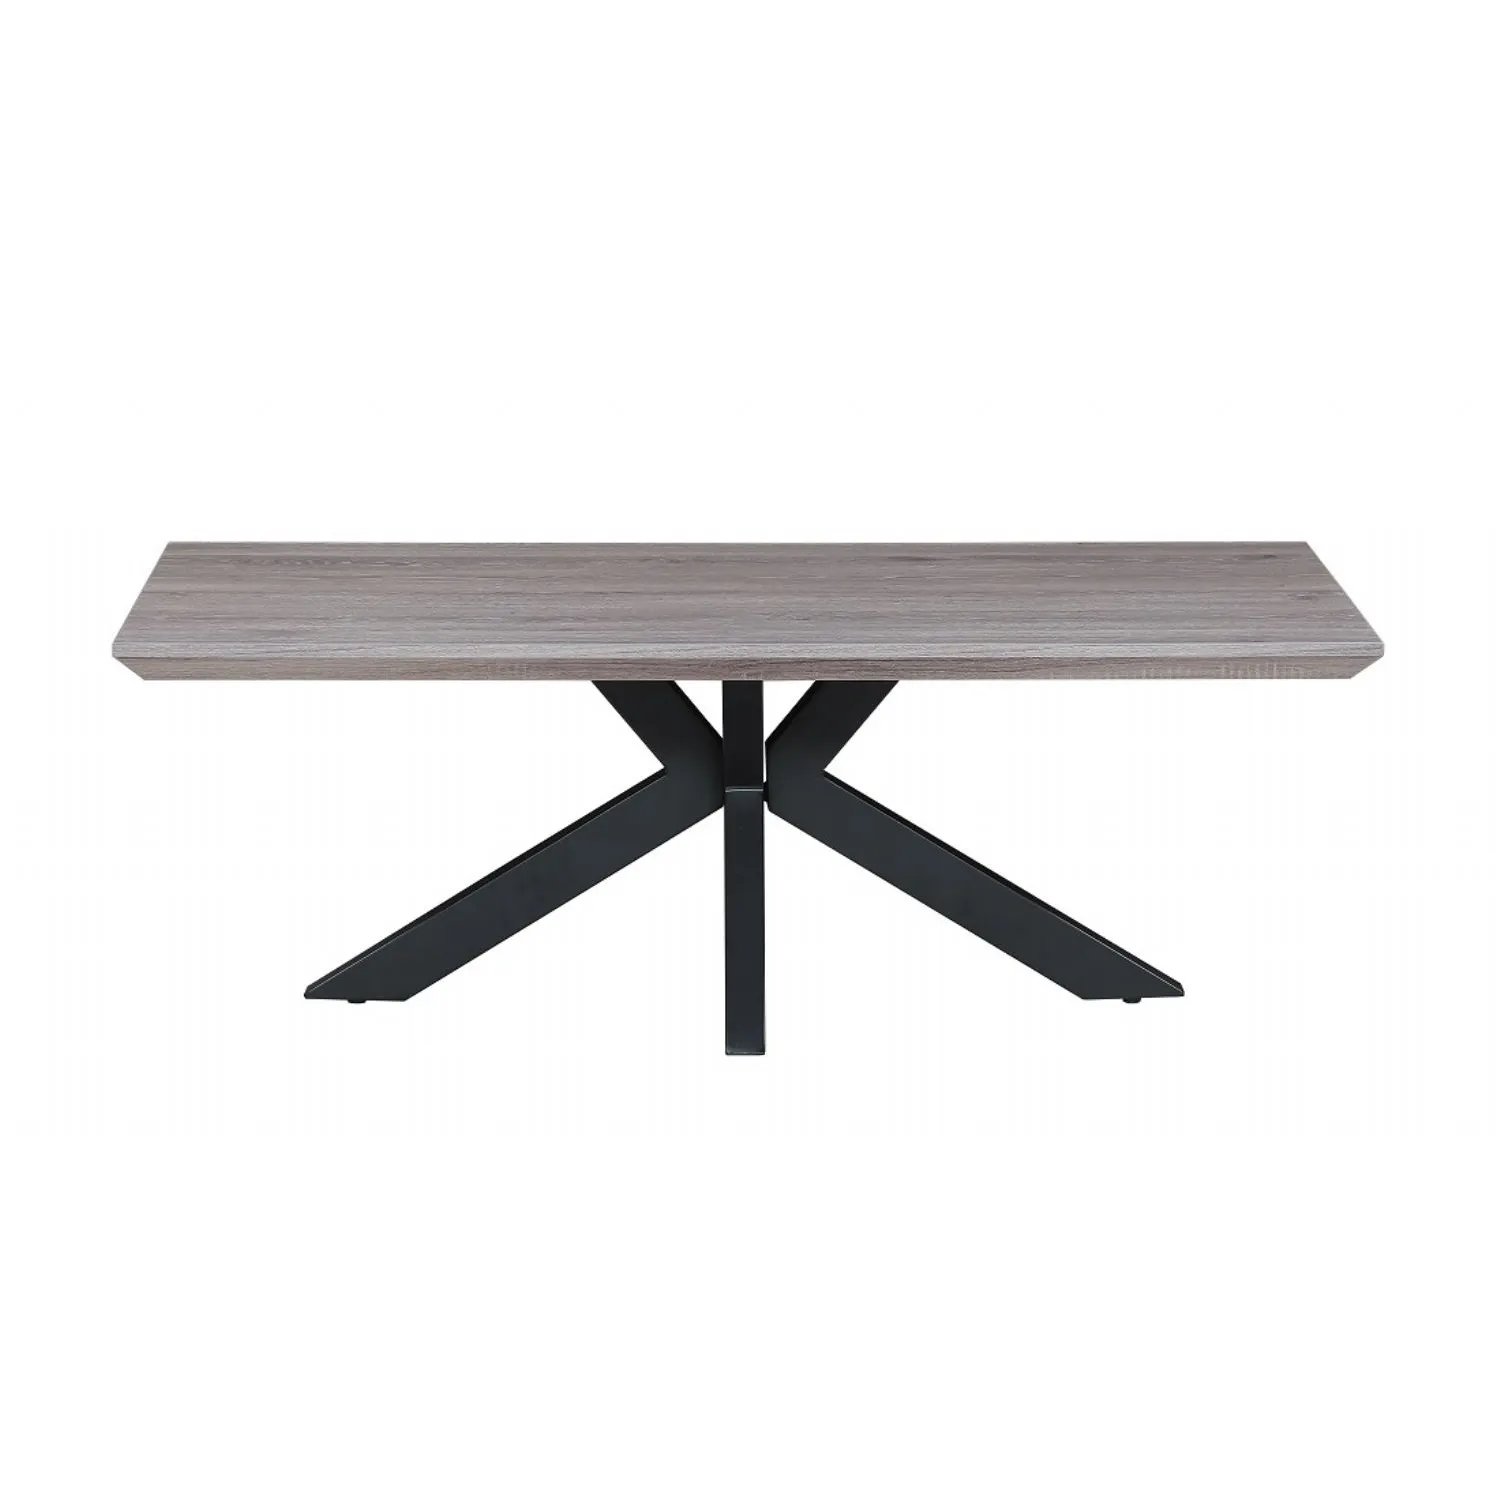 Grey Finish Wood Effect Top Coffee Table Spider Base